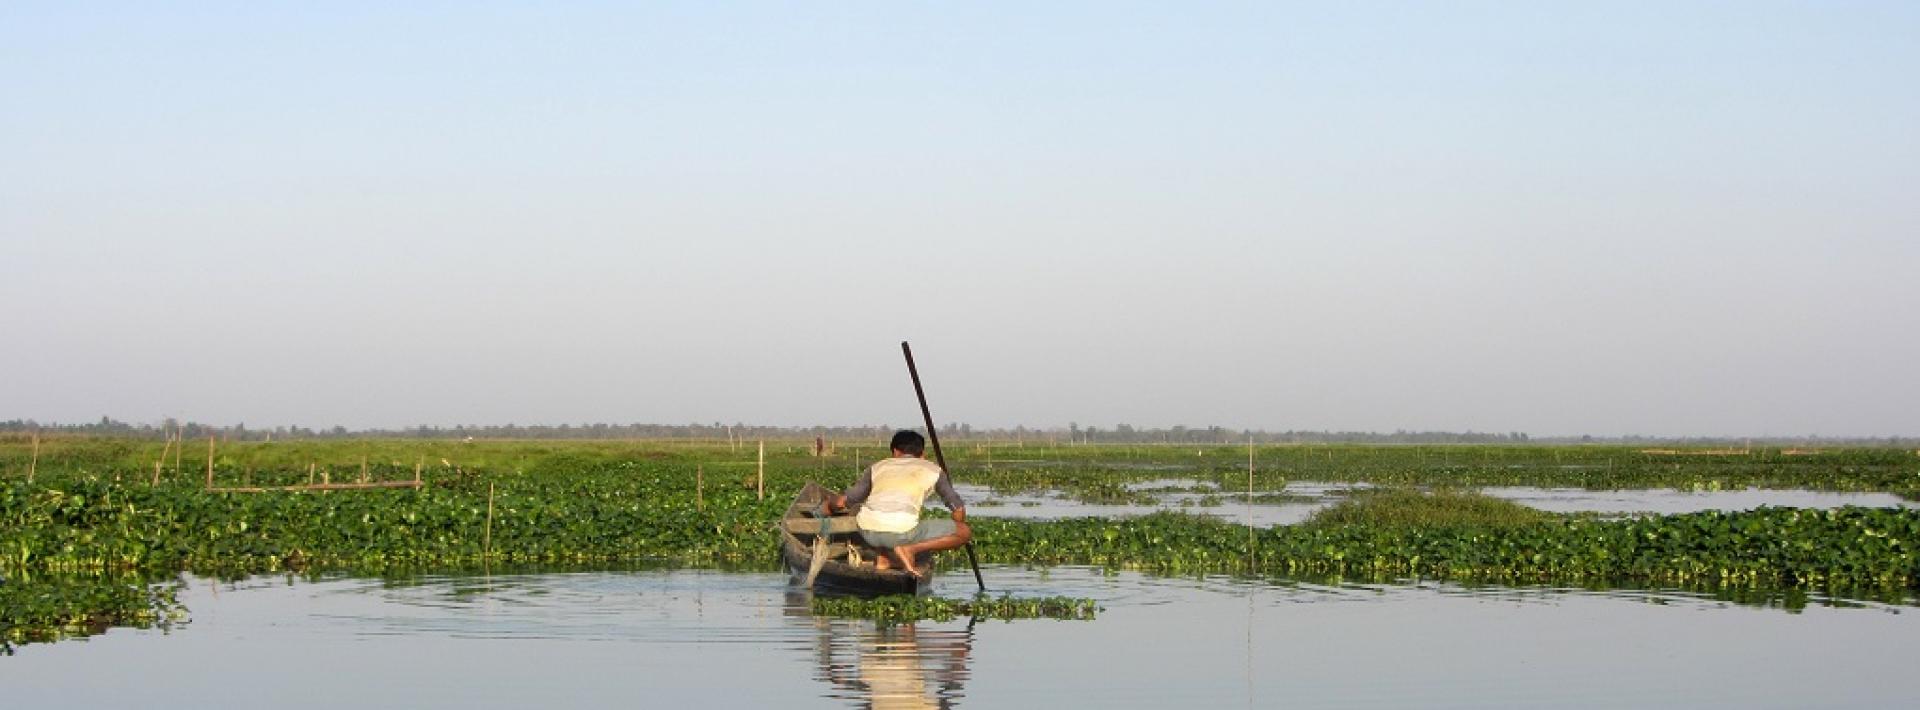 In Assam – a wetland too popular for its own good